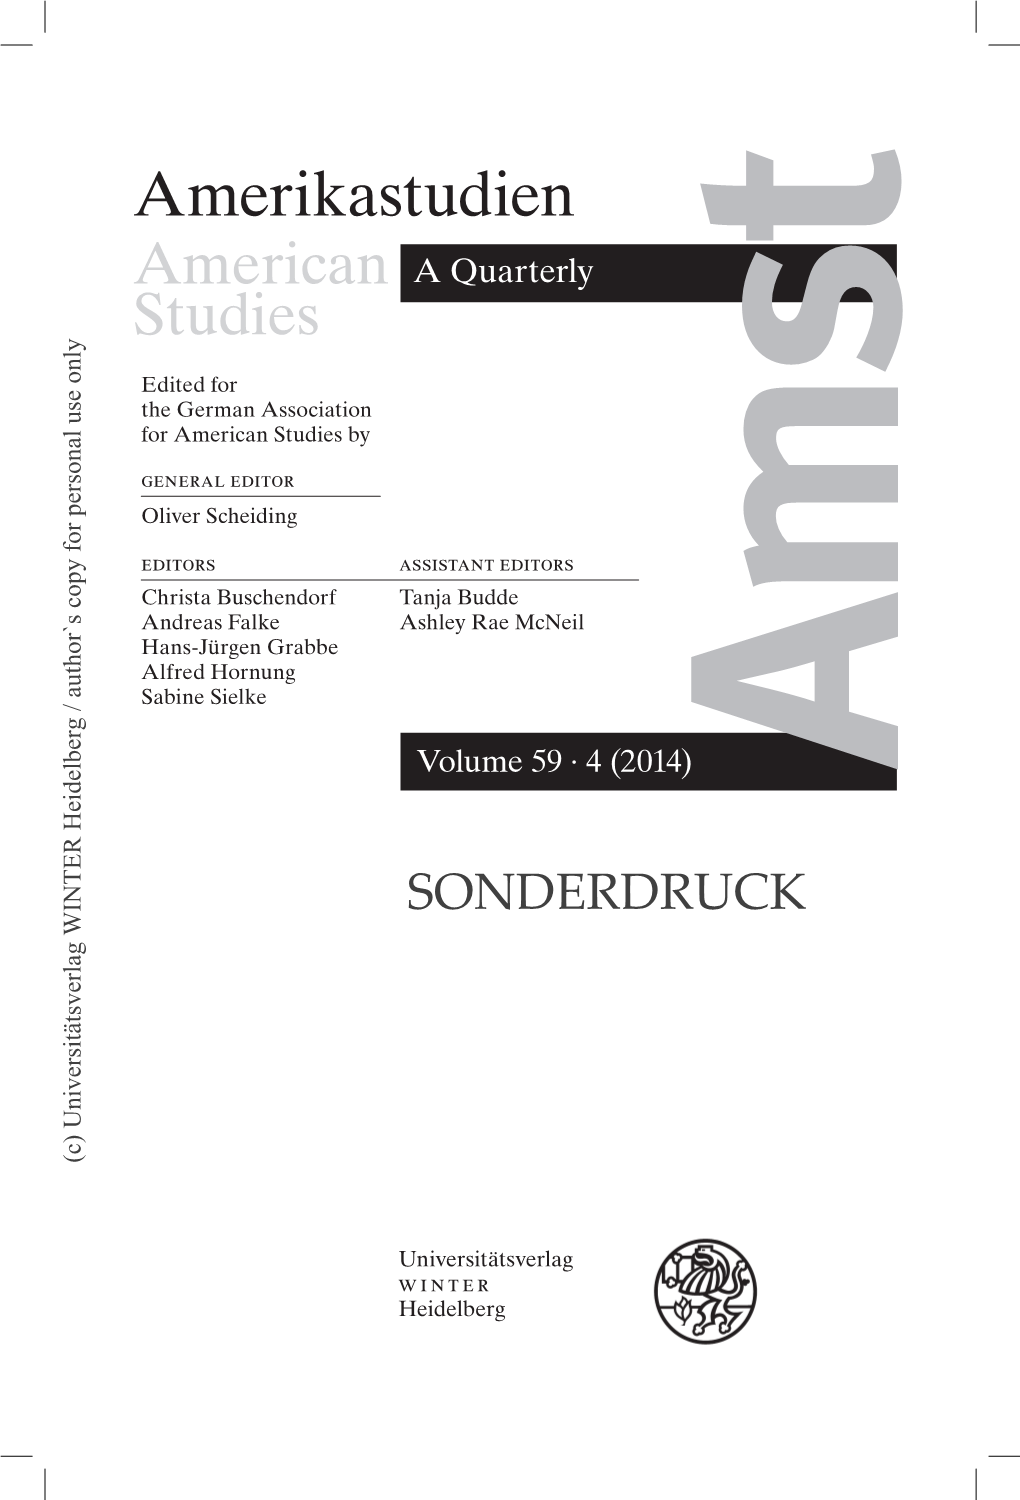 Amerikastudien American a Quarterly Studies Only Edited for the German Association Use for American Studies By